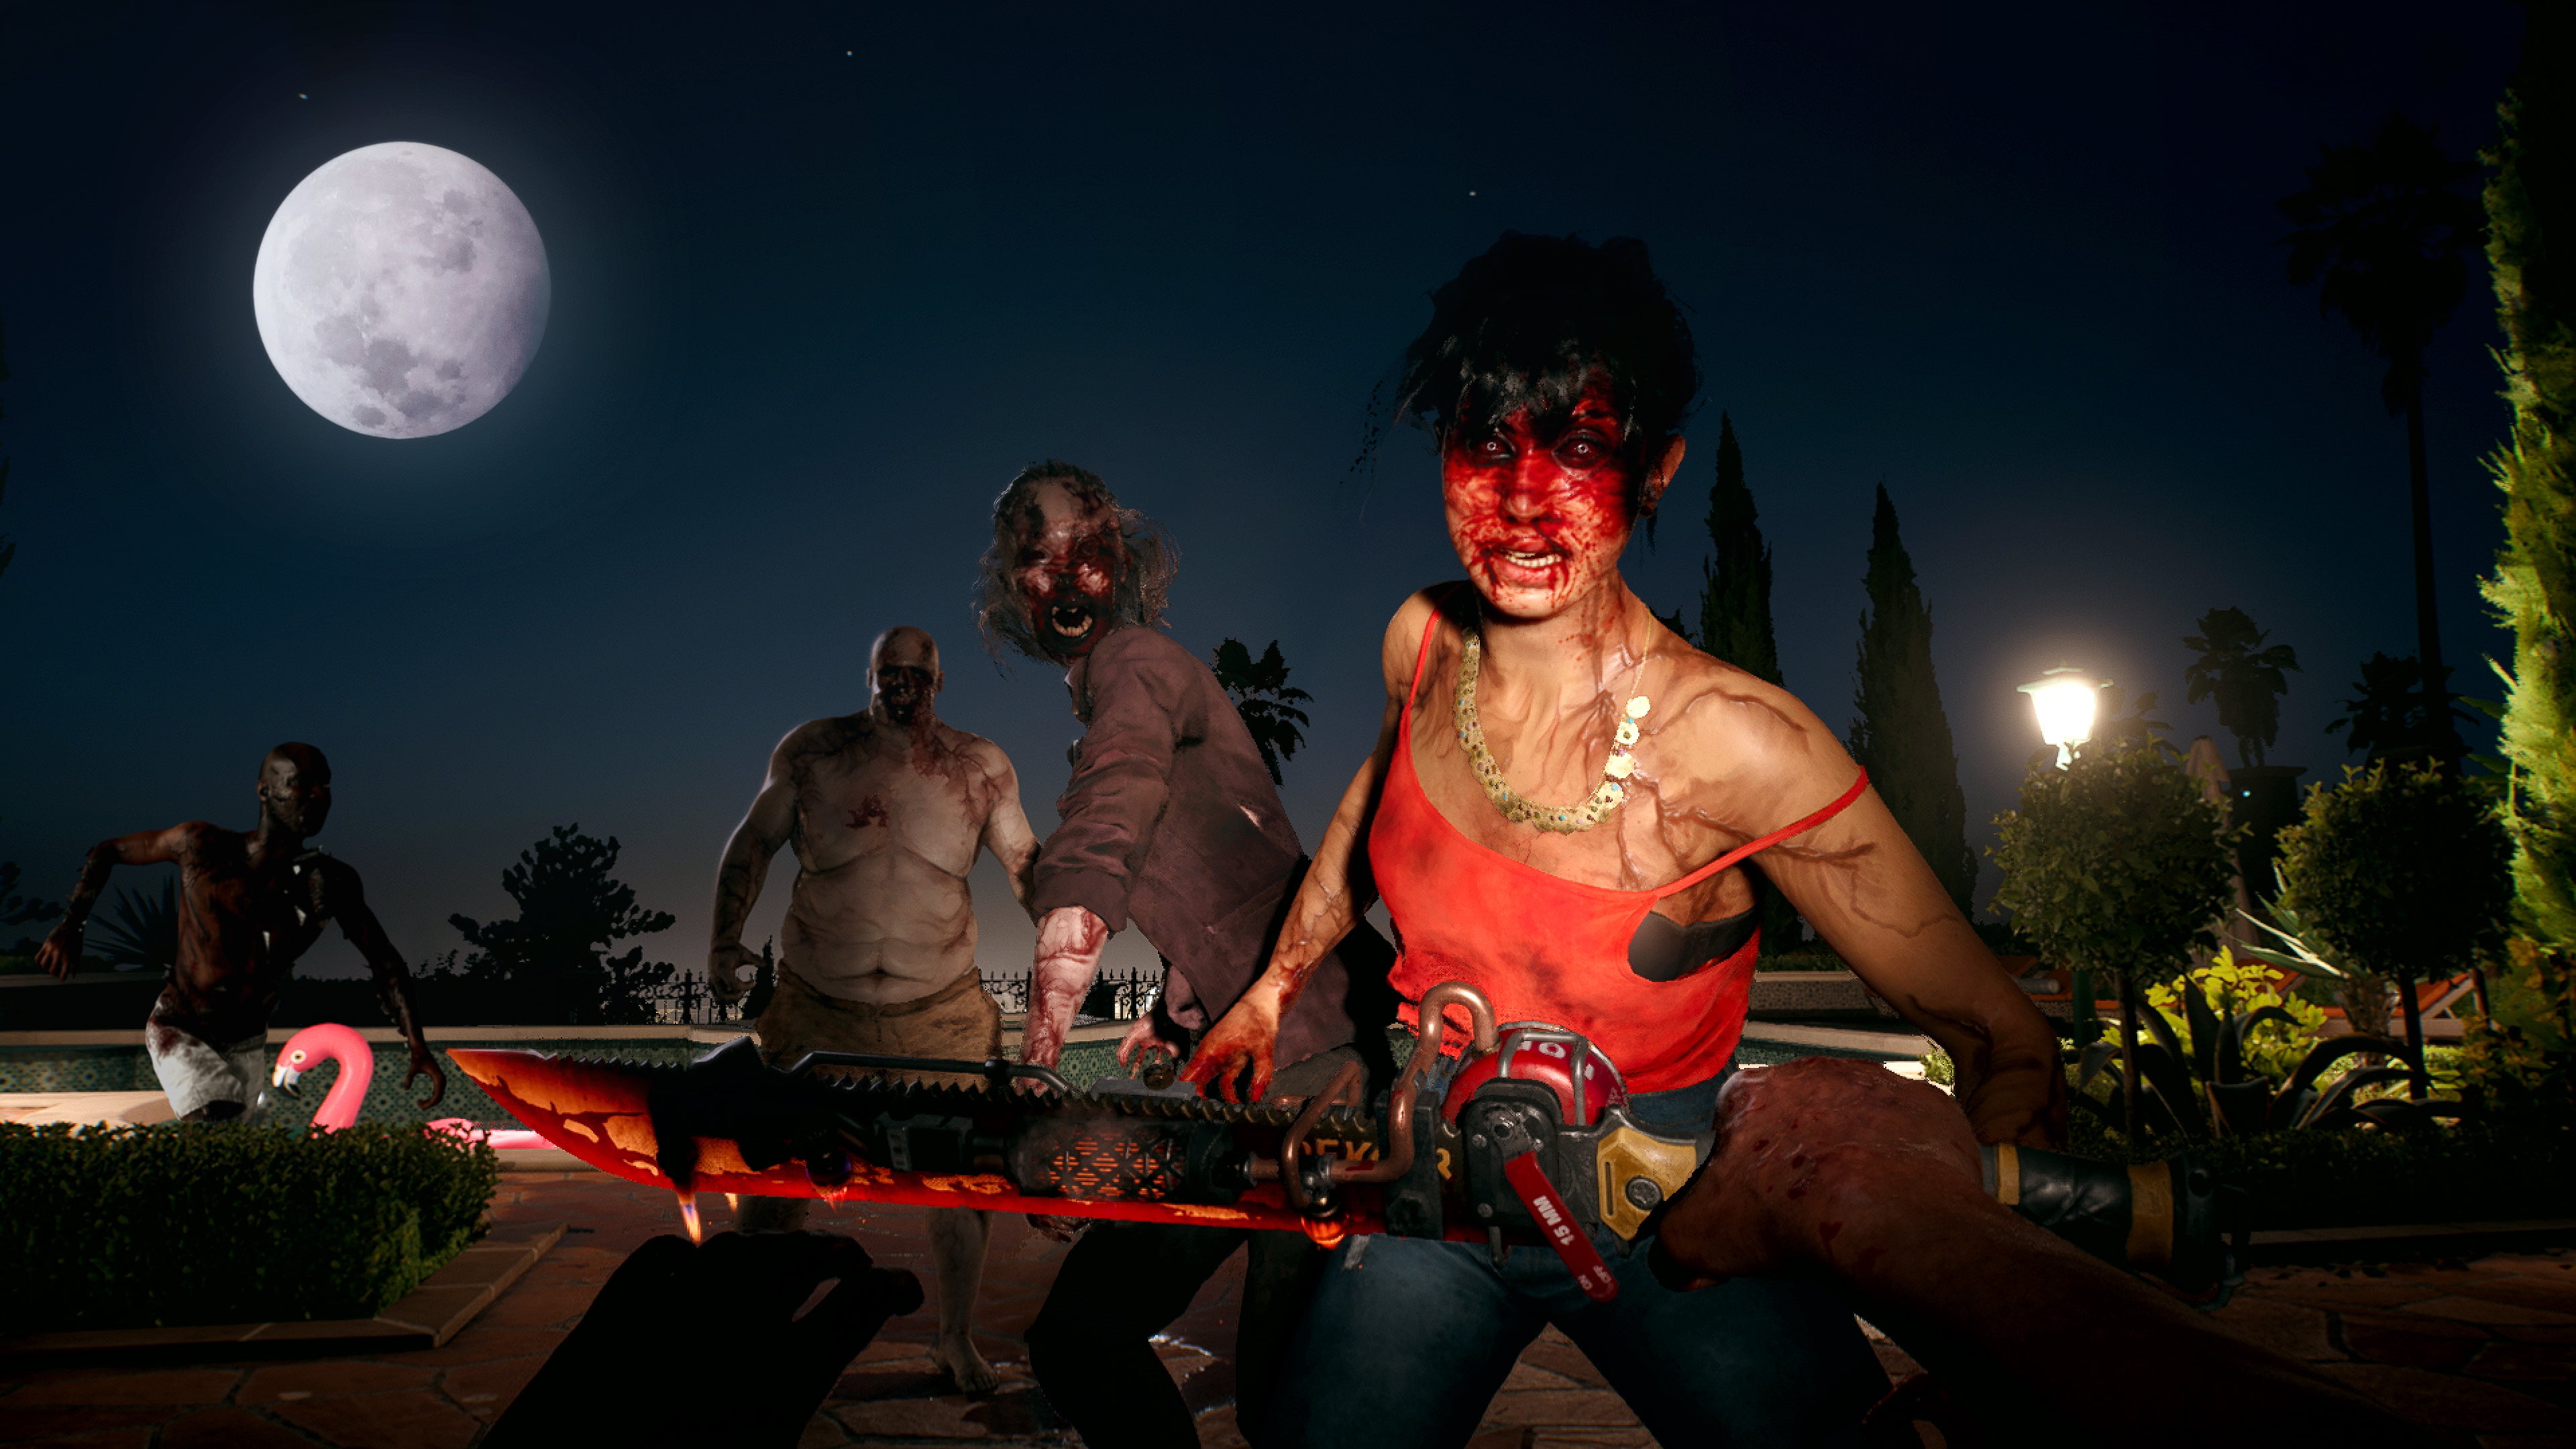 A group of bloodstained zombies advance on the player in Dead Island 2, who is holding a flame-augmented machete, under the full moon